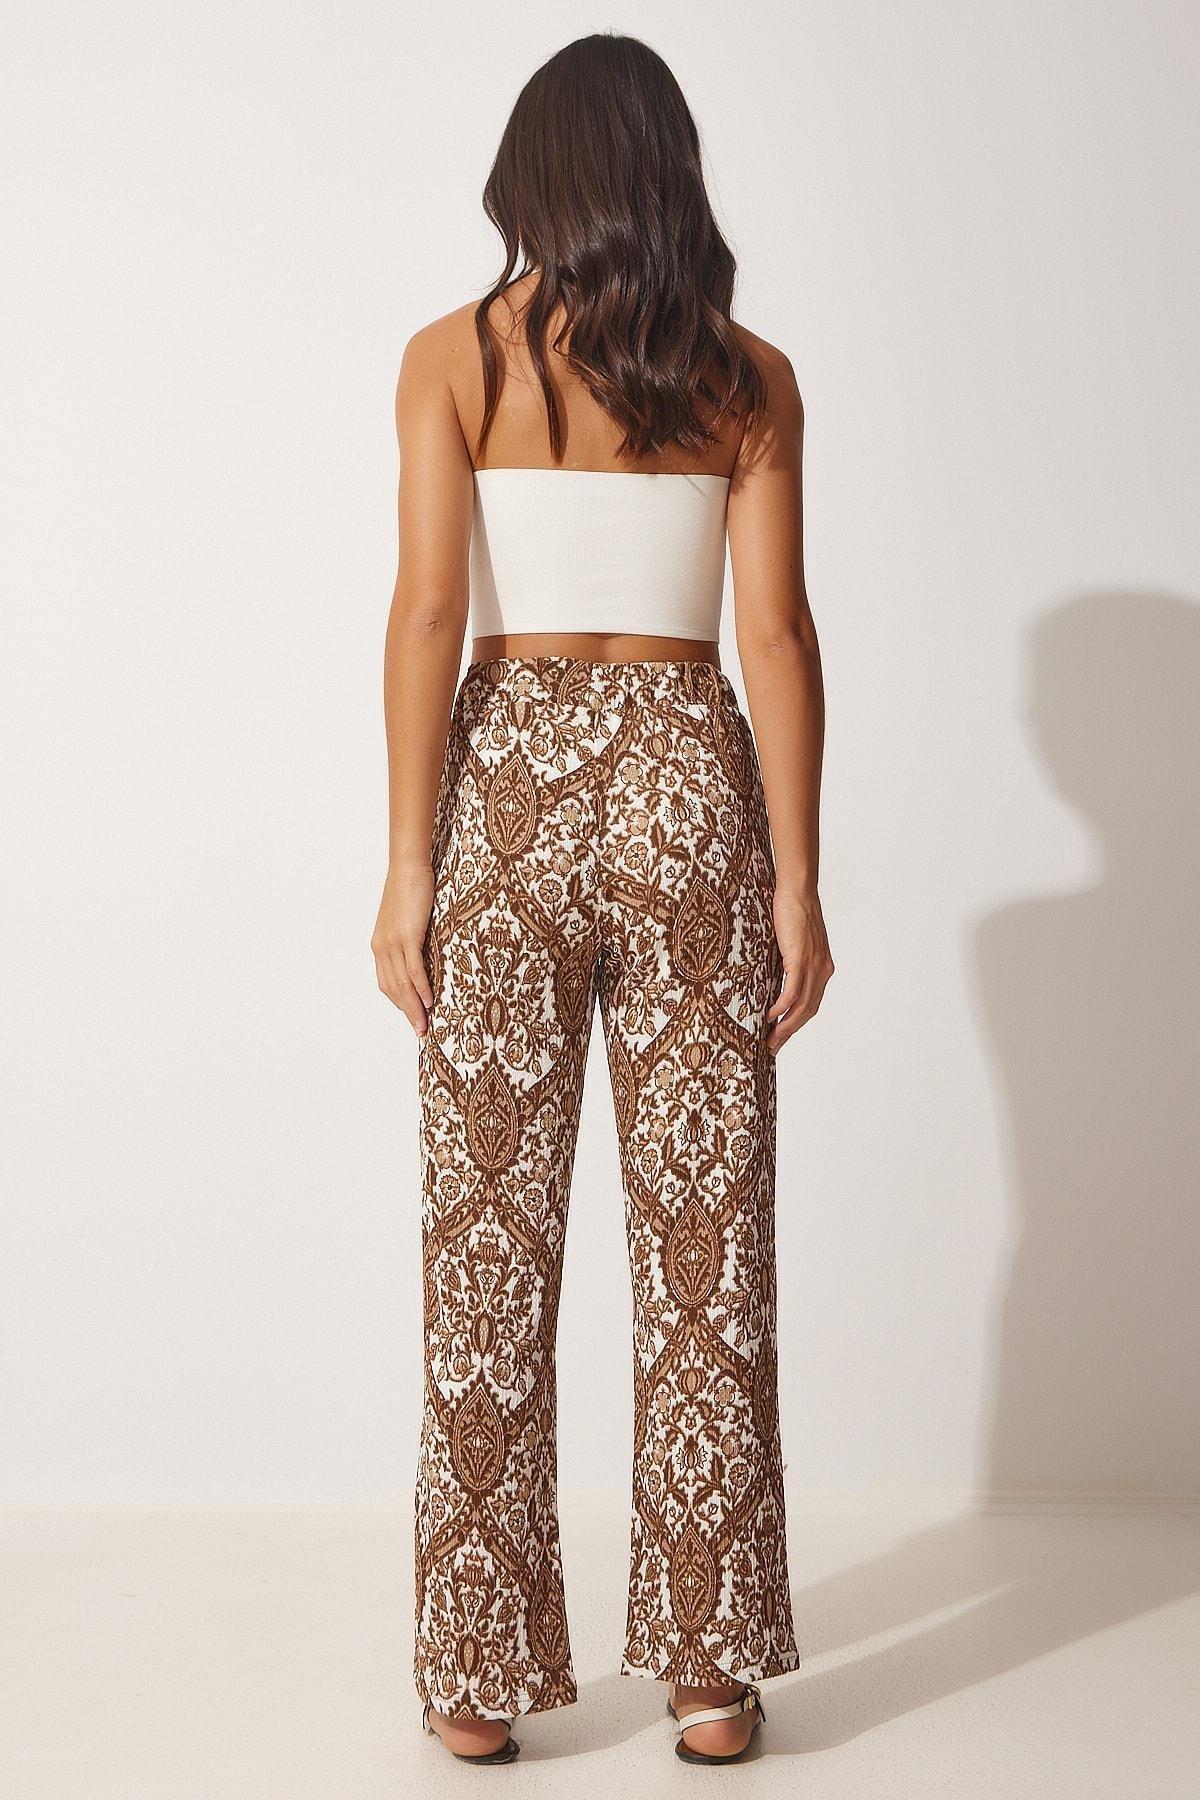 Happiness Istanbul - Brown Patterned Summer Loose Palazzo Pants